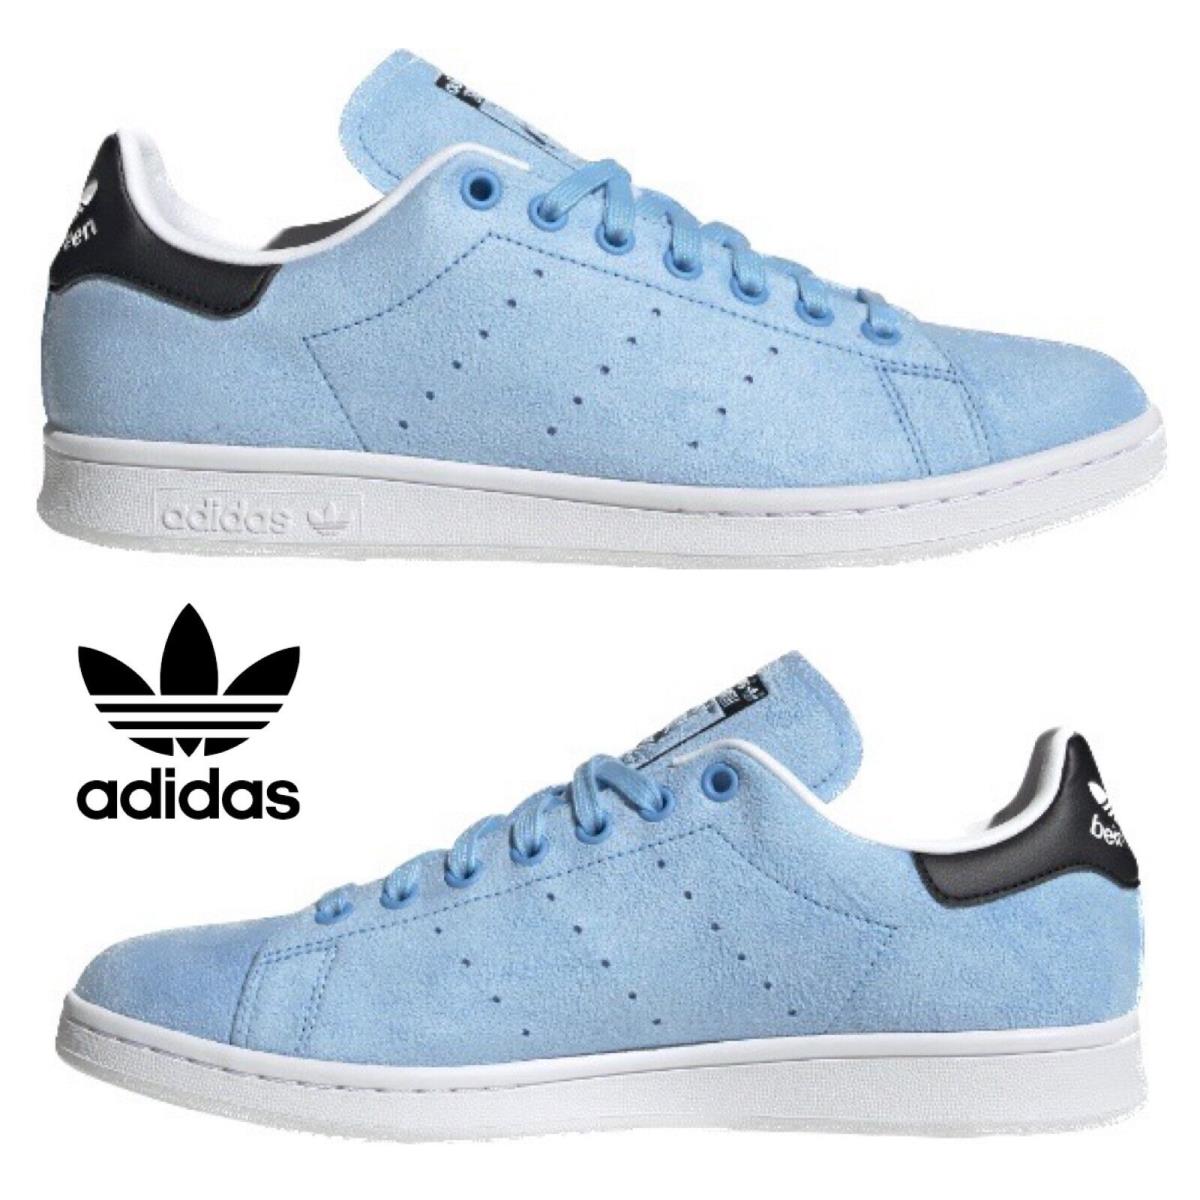 Adidas Originals Stan Smith Men`s Sneakers Comfort Sport Casual Shoes White Blue